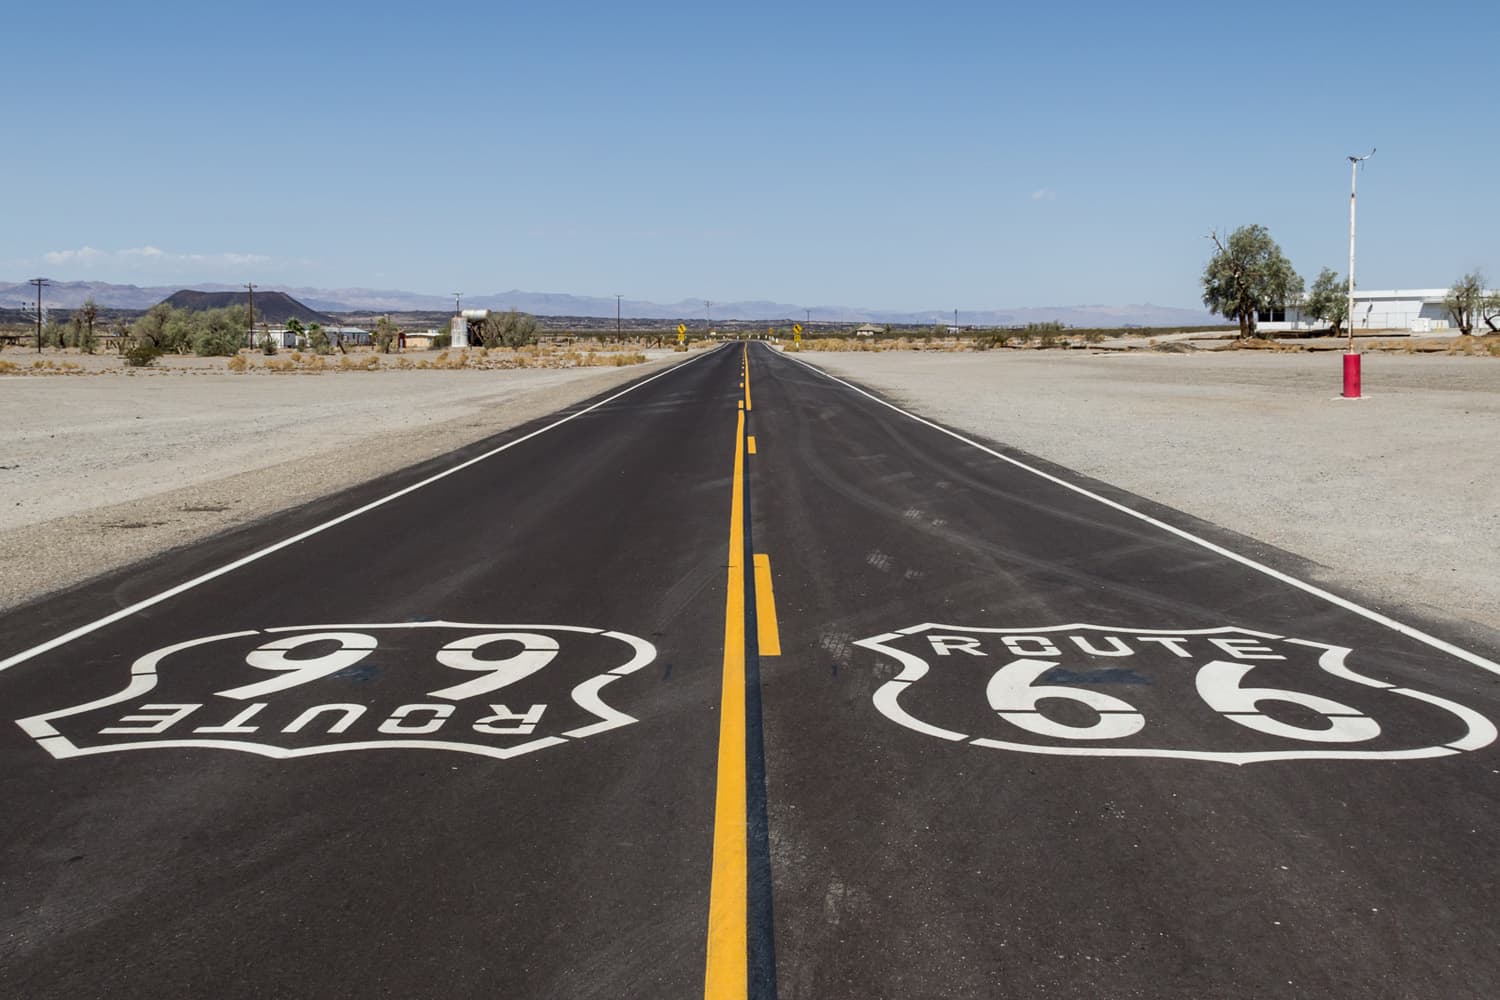 A portion of the historic U.S. Route 66 in Amboy, CA. (Dietmar Rabich/Creative Commons)